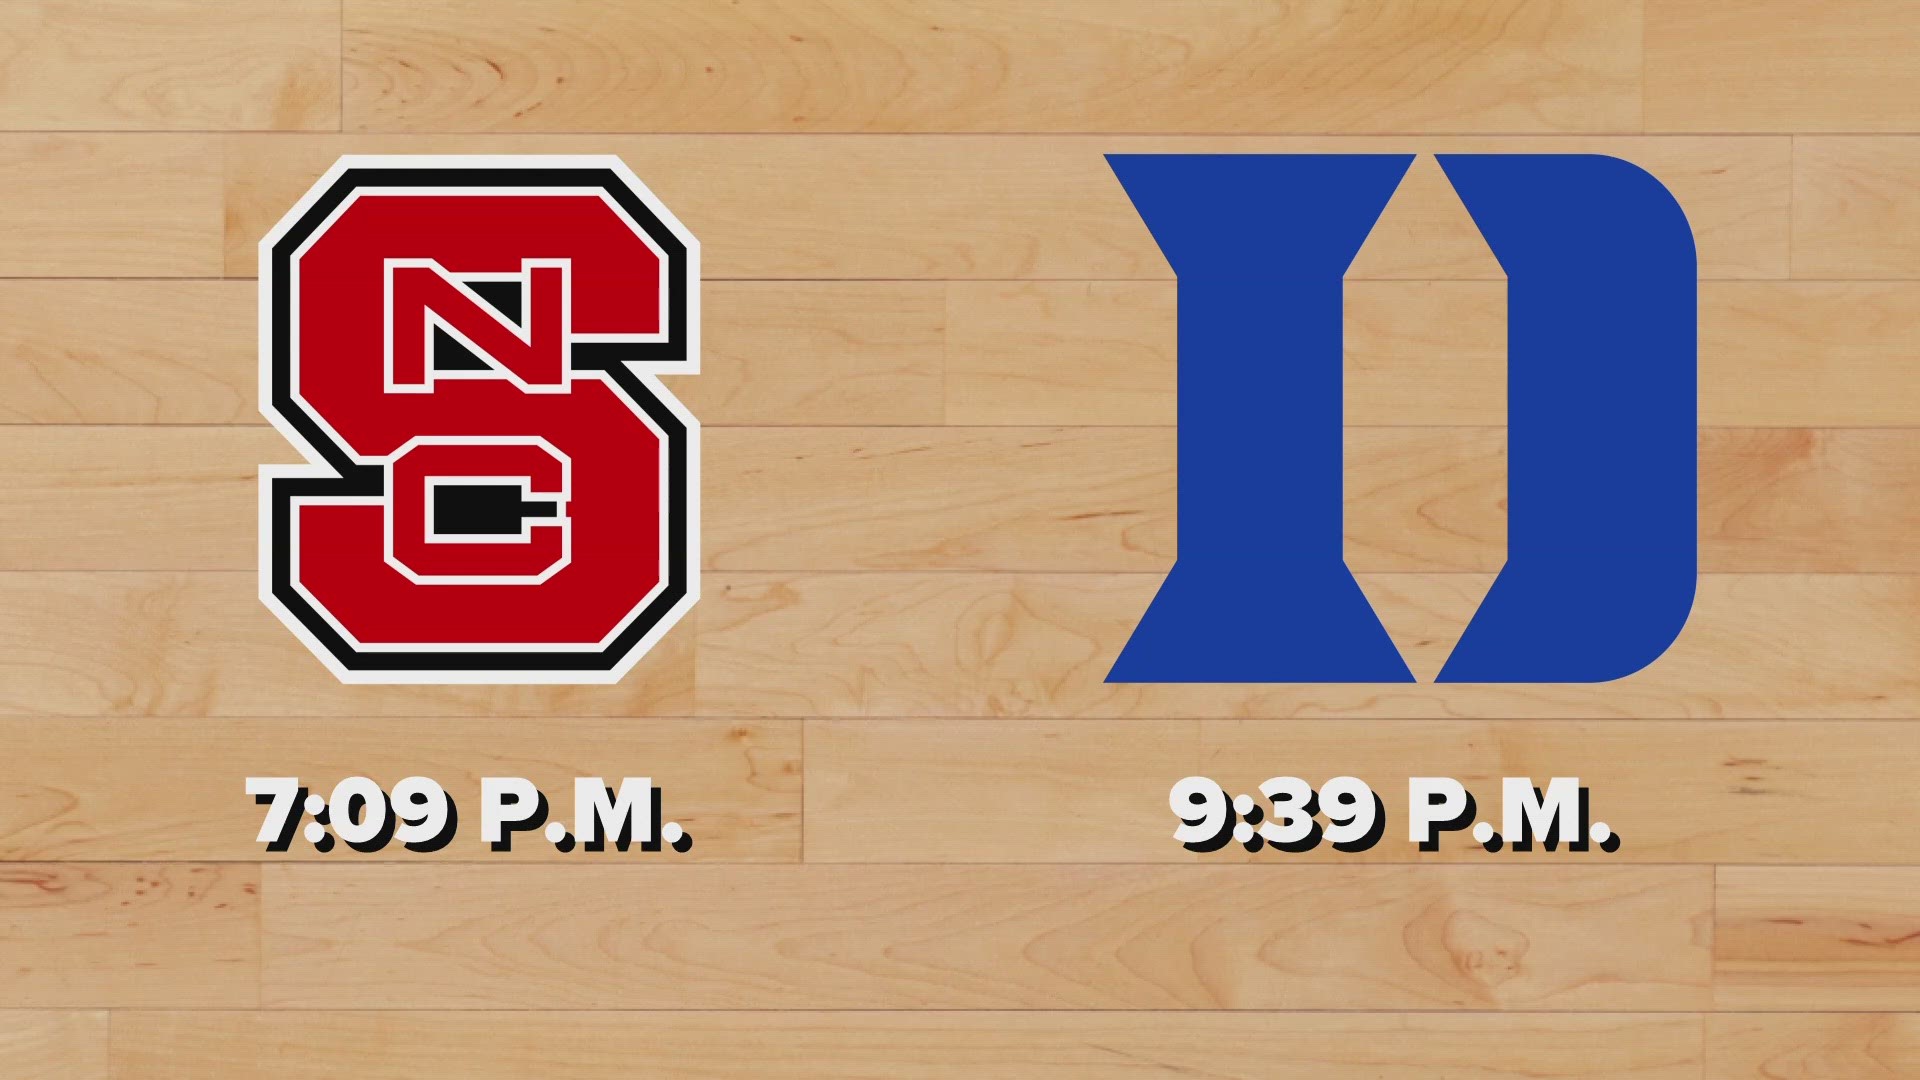 The Blue Devils and Wolfpack each need upset wins to keep dancing in March.